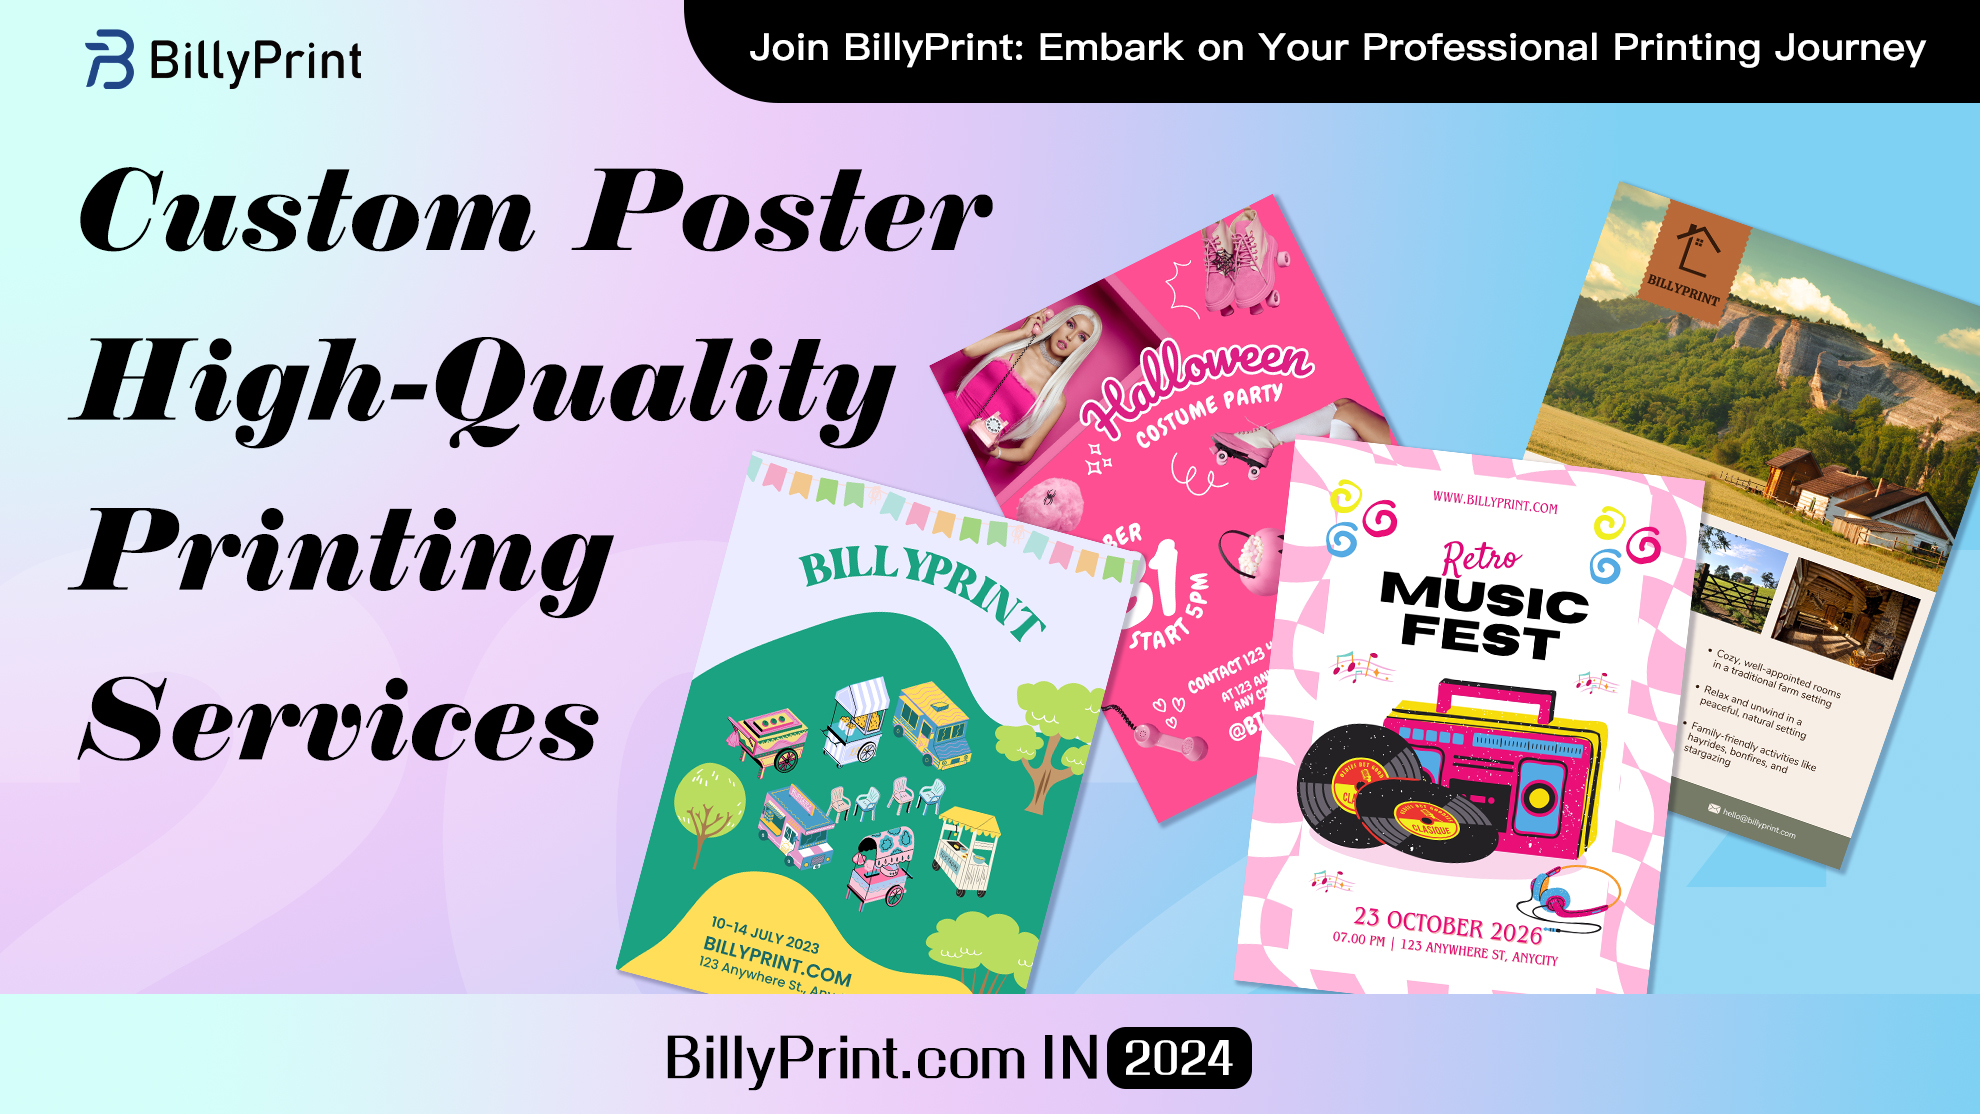 Custom Posters High-Quality Printing Services